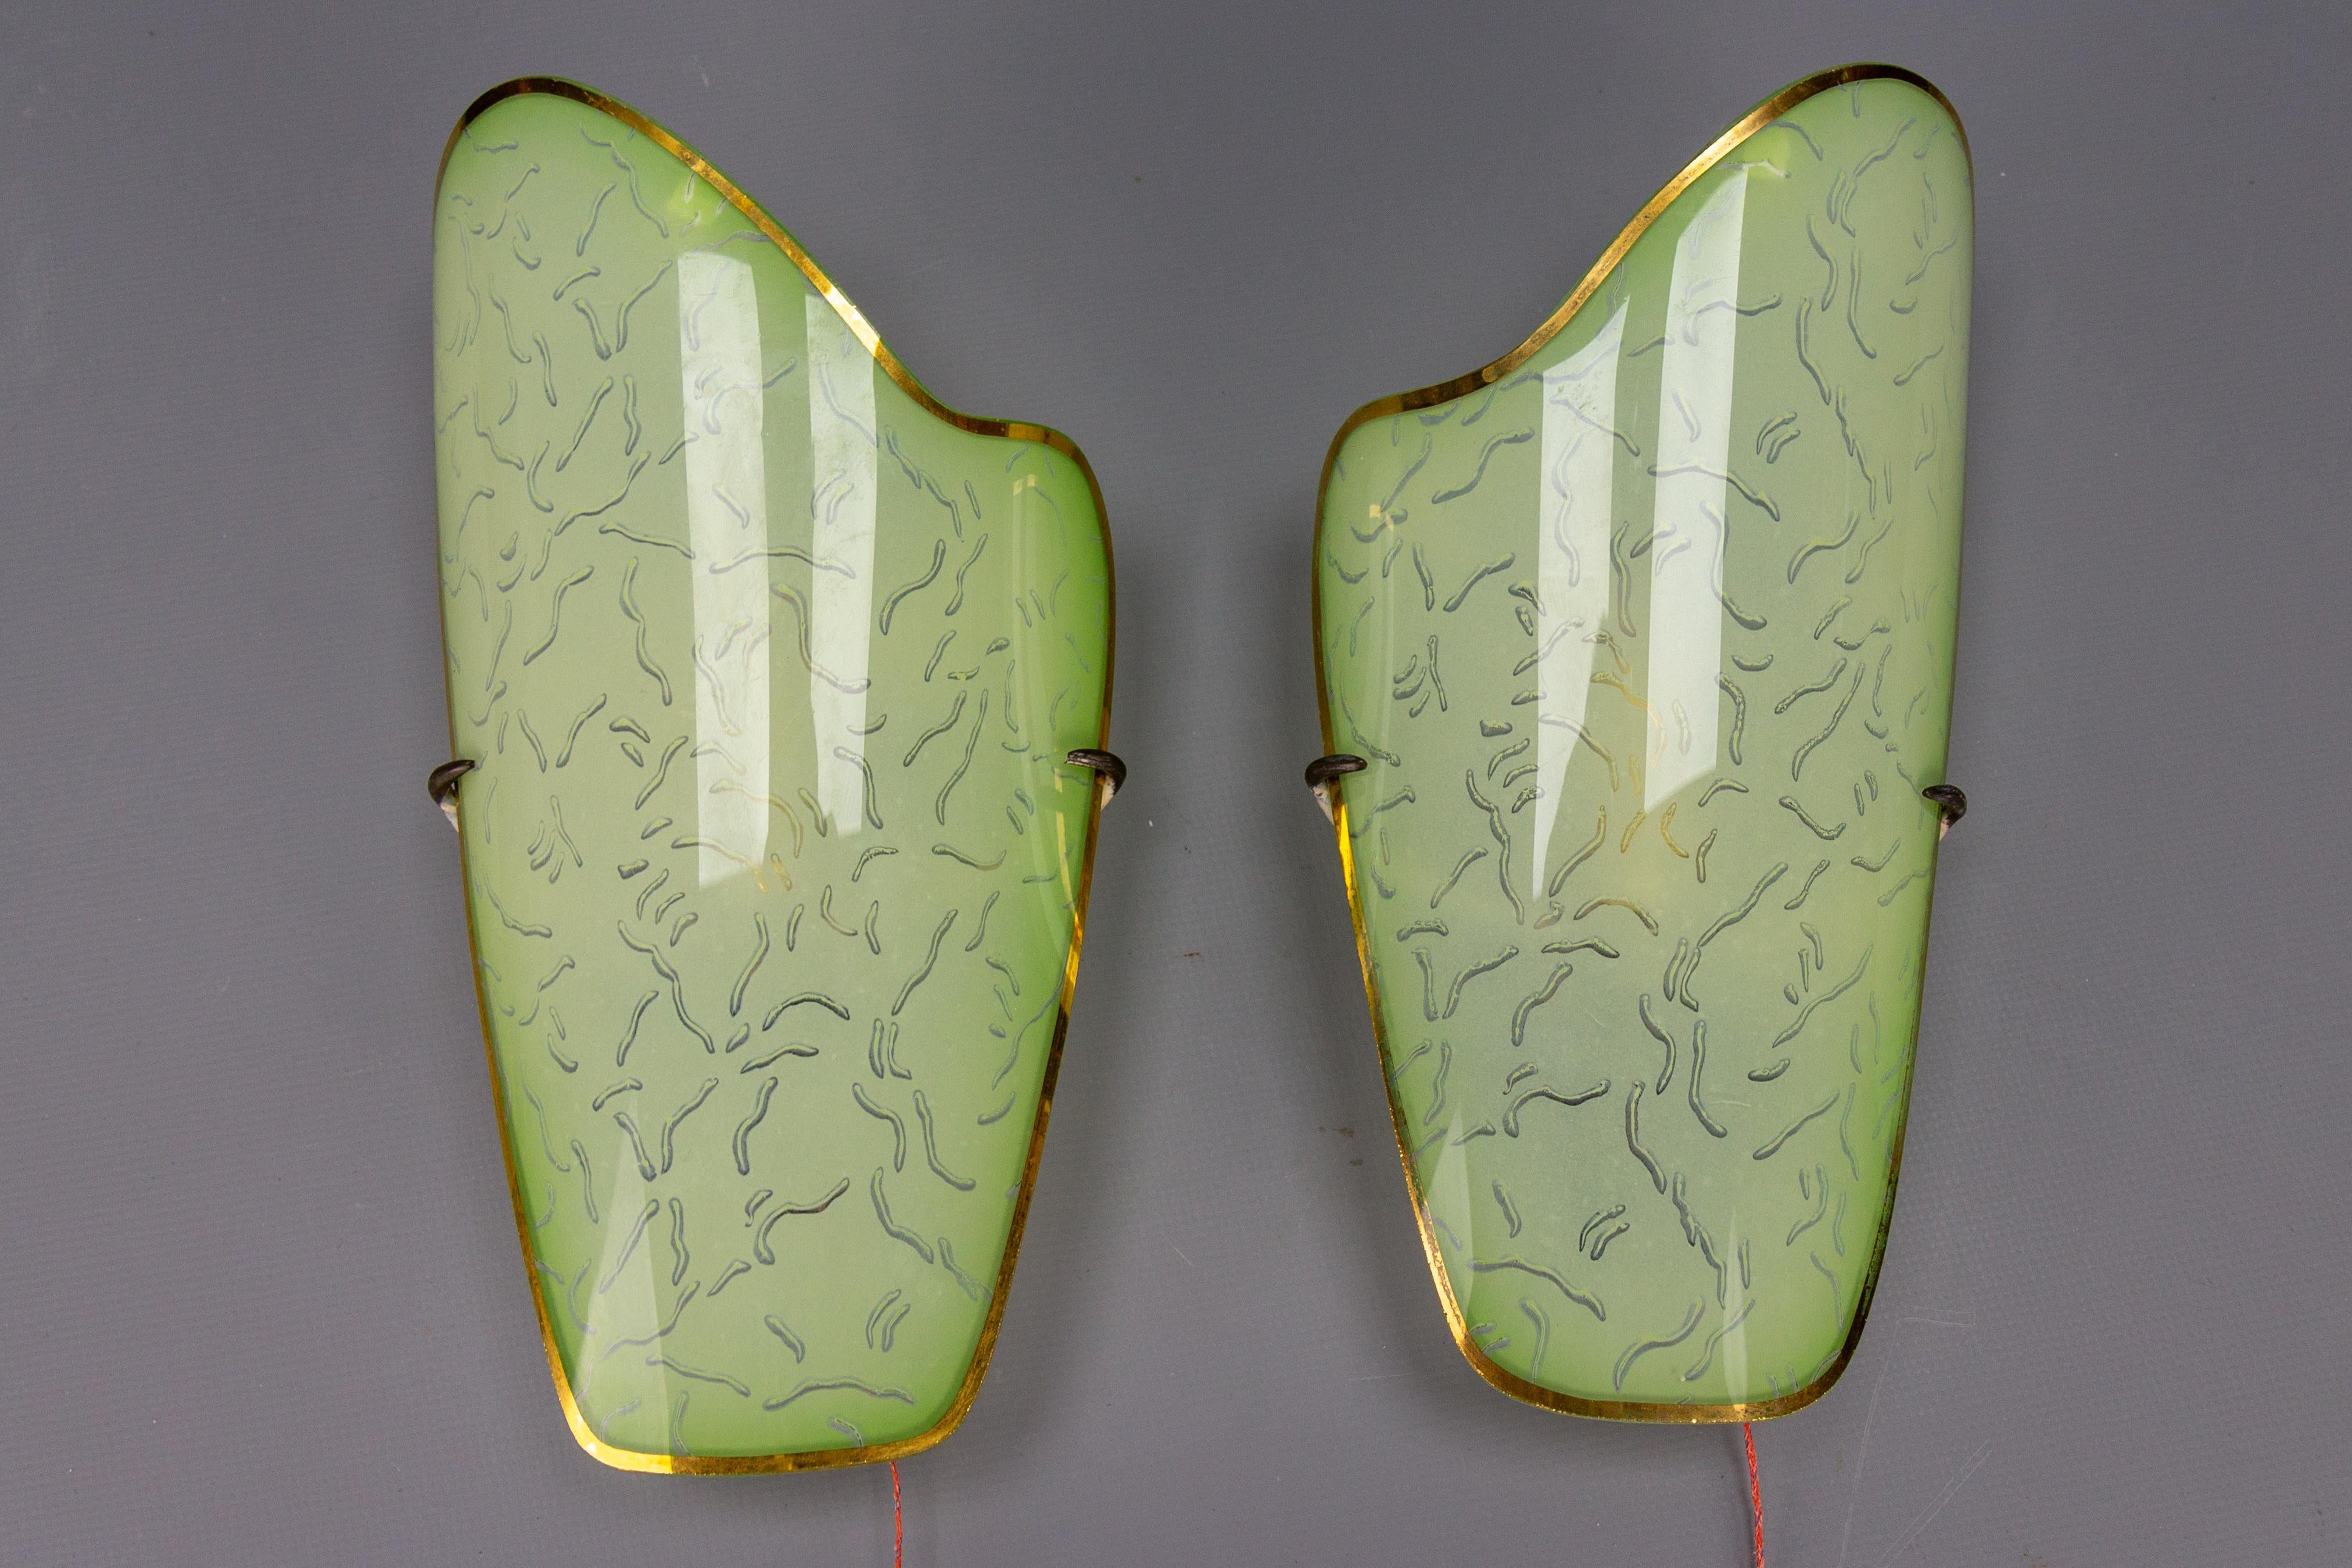 Pair of Mid-Century Modern curved green glass sconces, Germany, circa the 1950s.
This beautiful pair of sconces features curved green glass lampshades with a golden color edge. Each sconce has one new socket for an E14-size light bulb and a pull